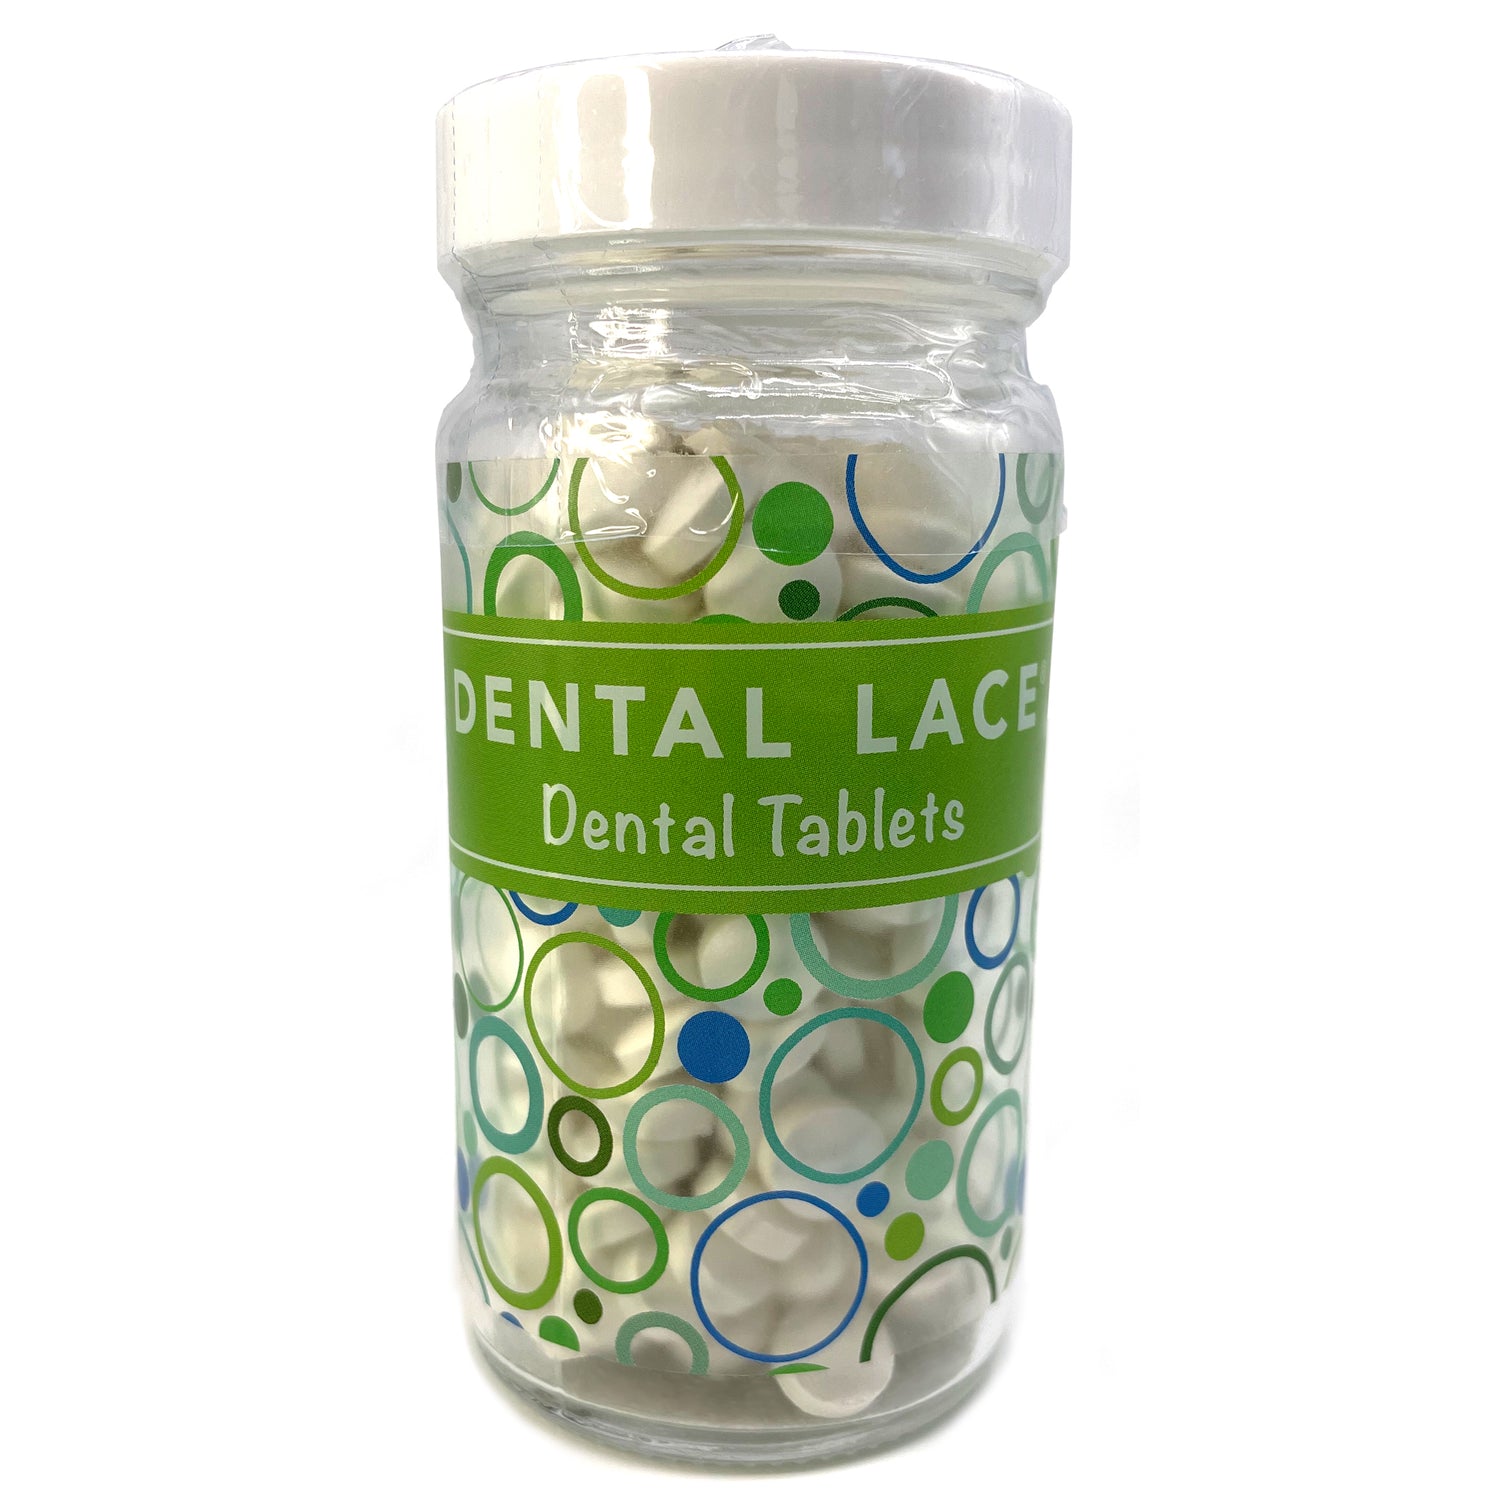 Dental Lace Fluoride Free Toothpaste Tablets Filled Container